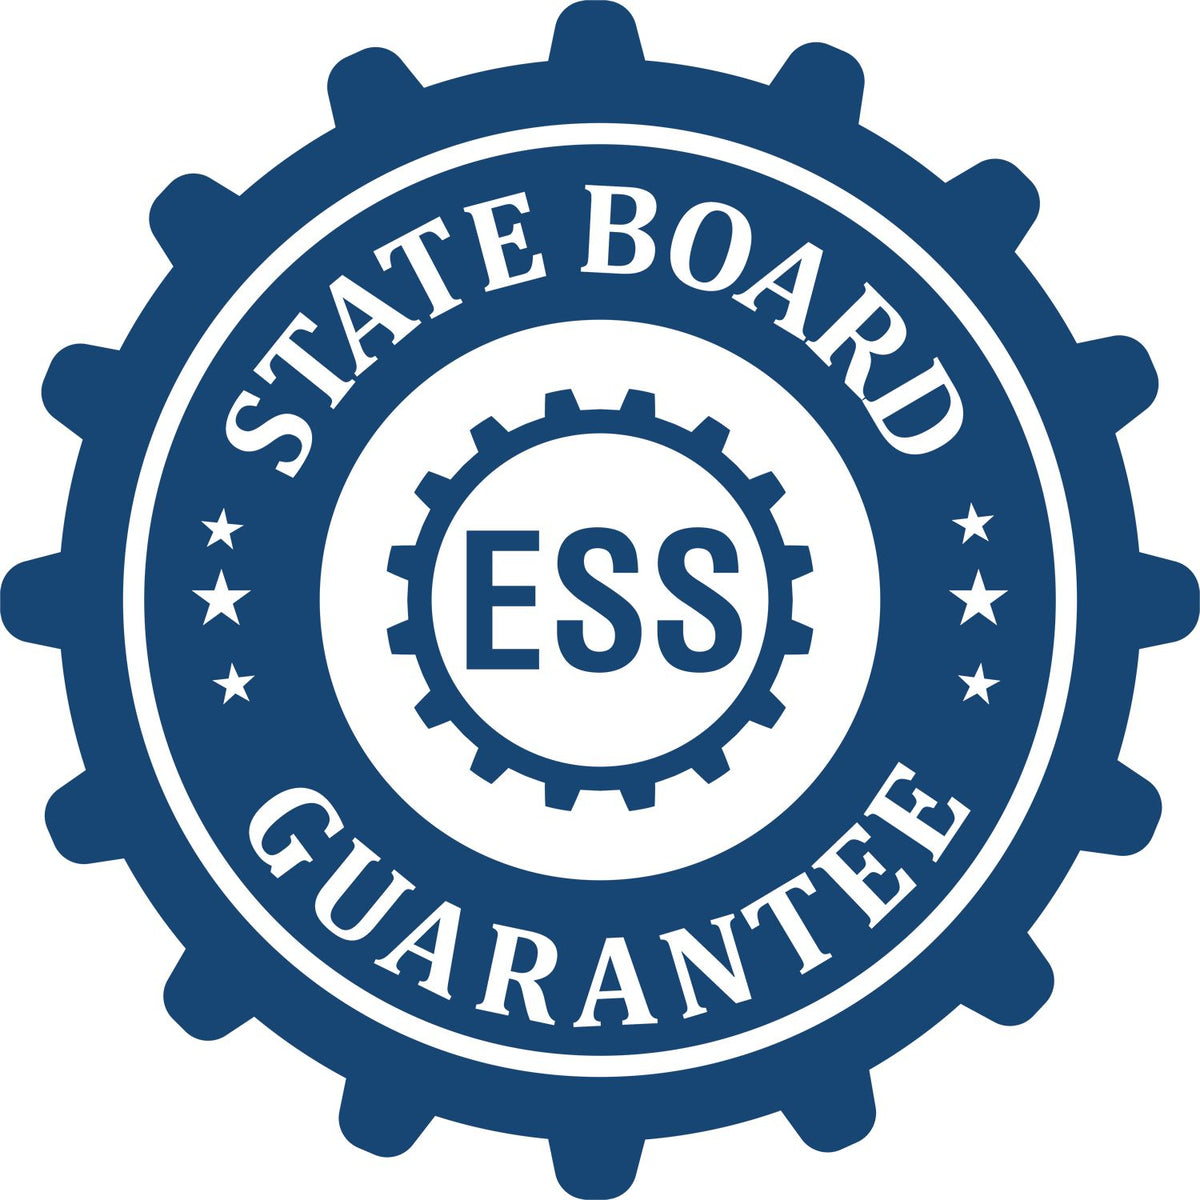 An emblem in a gear shape illustrating a state board guarantee for the Hybrid Georgia Engineer Seal